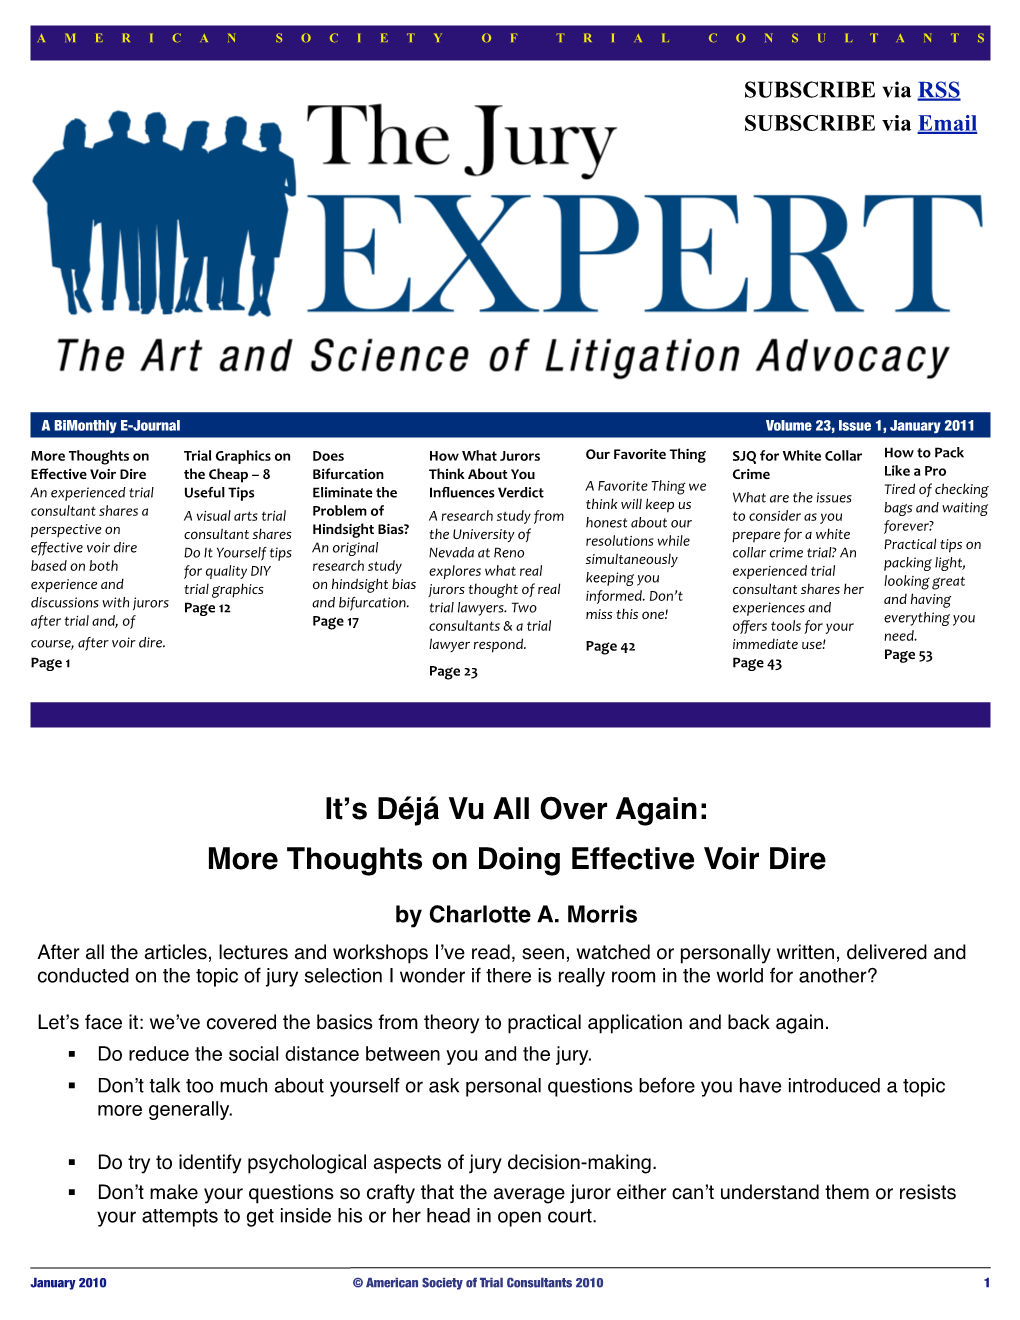 More Thoughts on Doing Effective Voir Dire